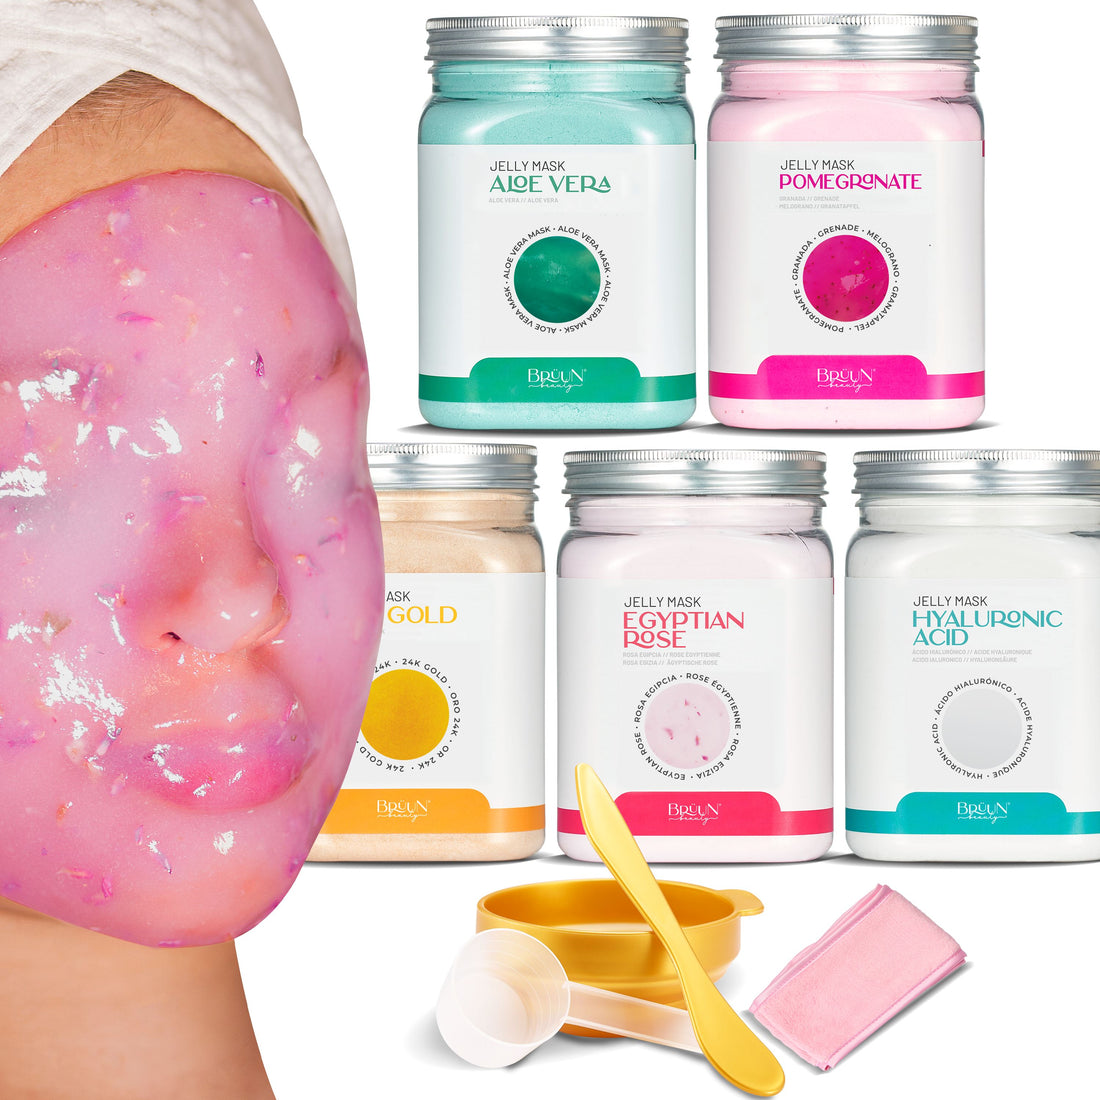 BRÜUN Peel-Off Premium Modeling Rubber Jelly Mask for Face Care- A Bundle of 5 Different Treatment Jars (24k Gold, Egyptian Rose, Pomegranate, Aloe Vera and Hyaluronic) for Body and Skin Care Bruun Beauty 